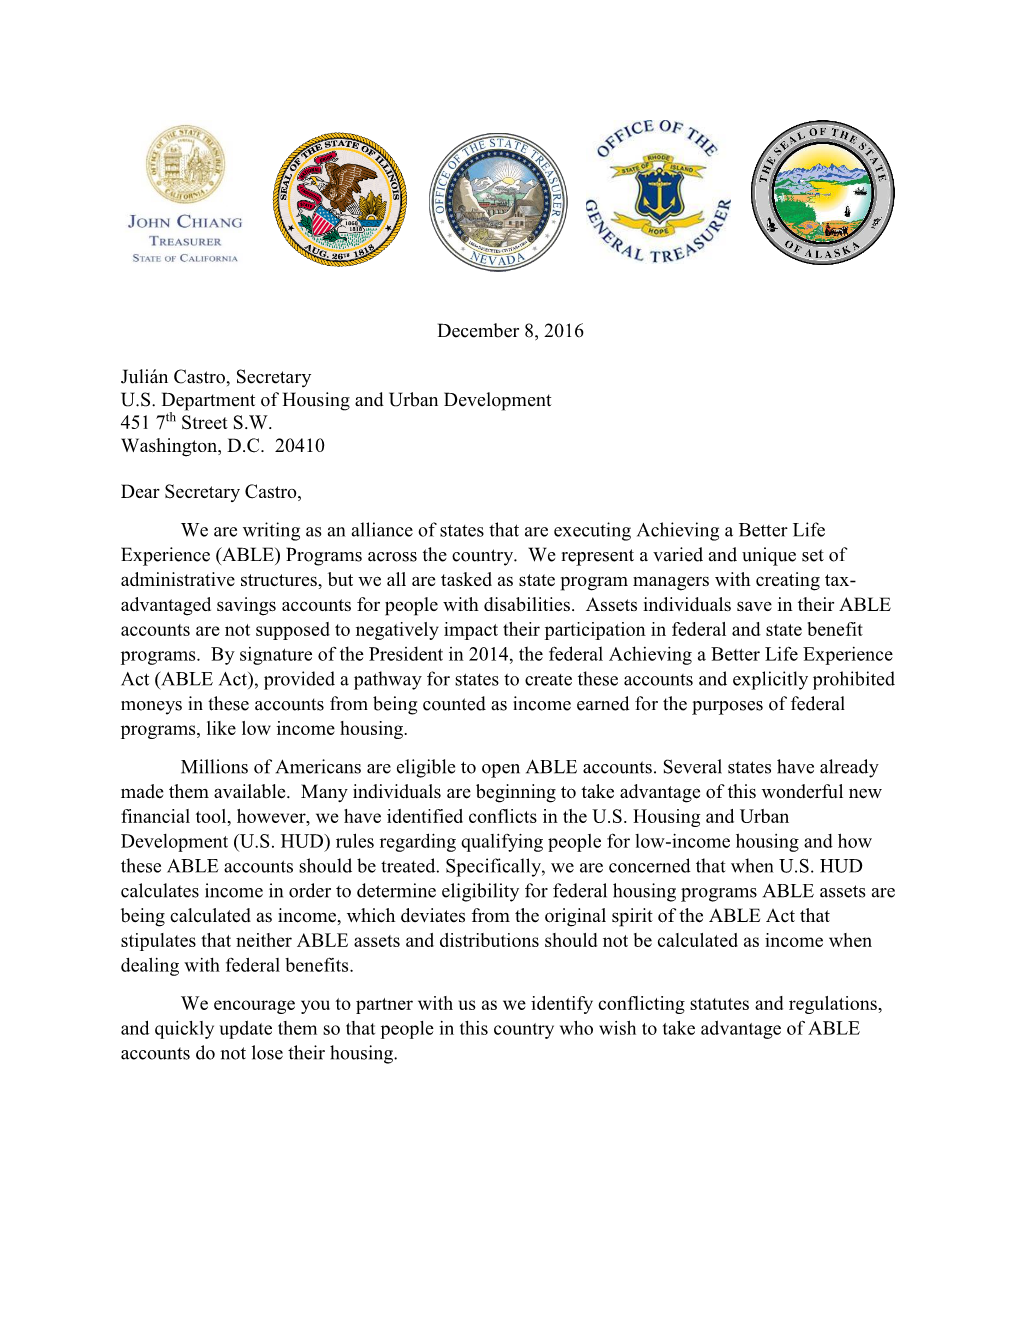 Treasurer Letter to the Secretary of HUD on Disabled Housing Assistance